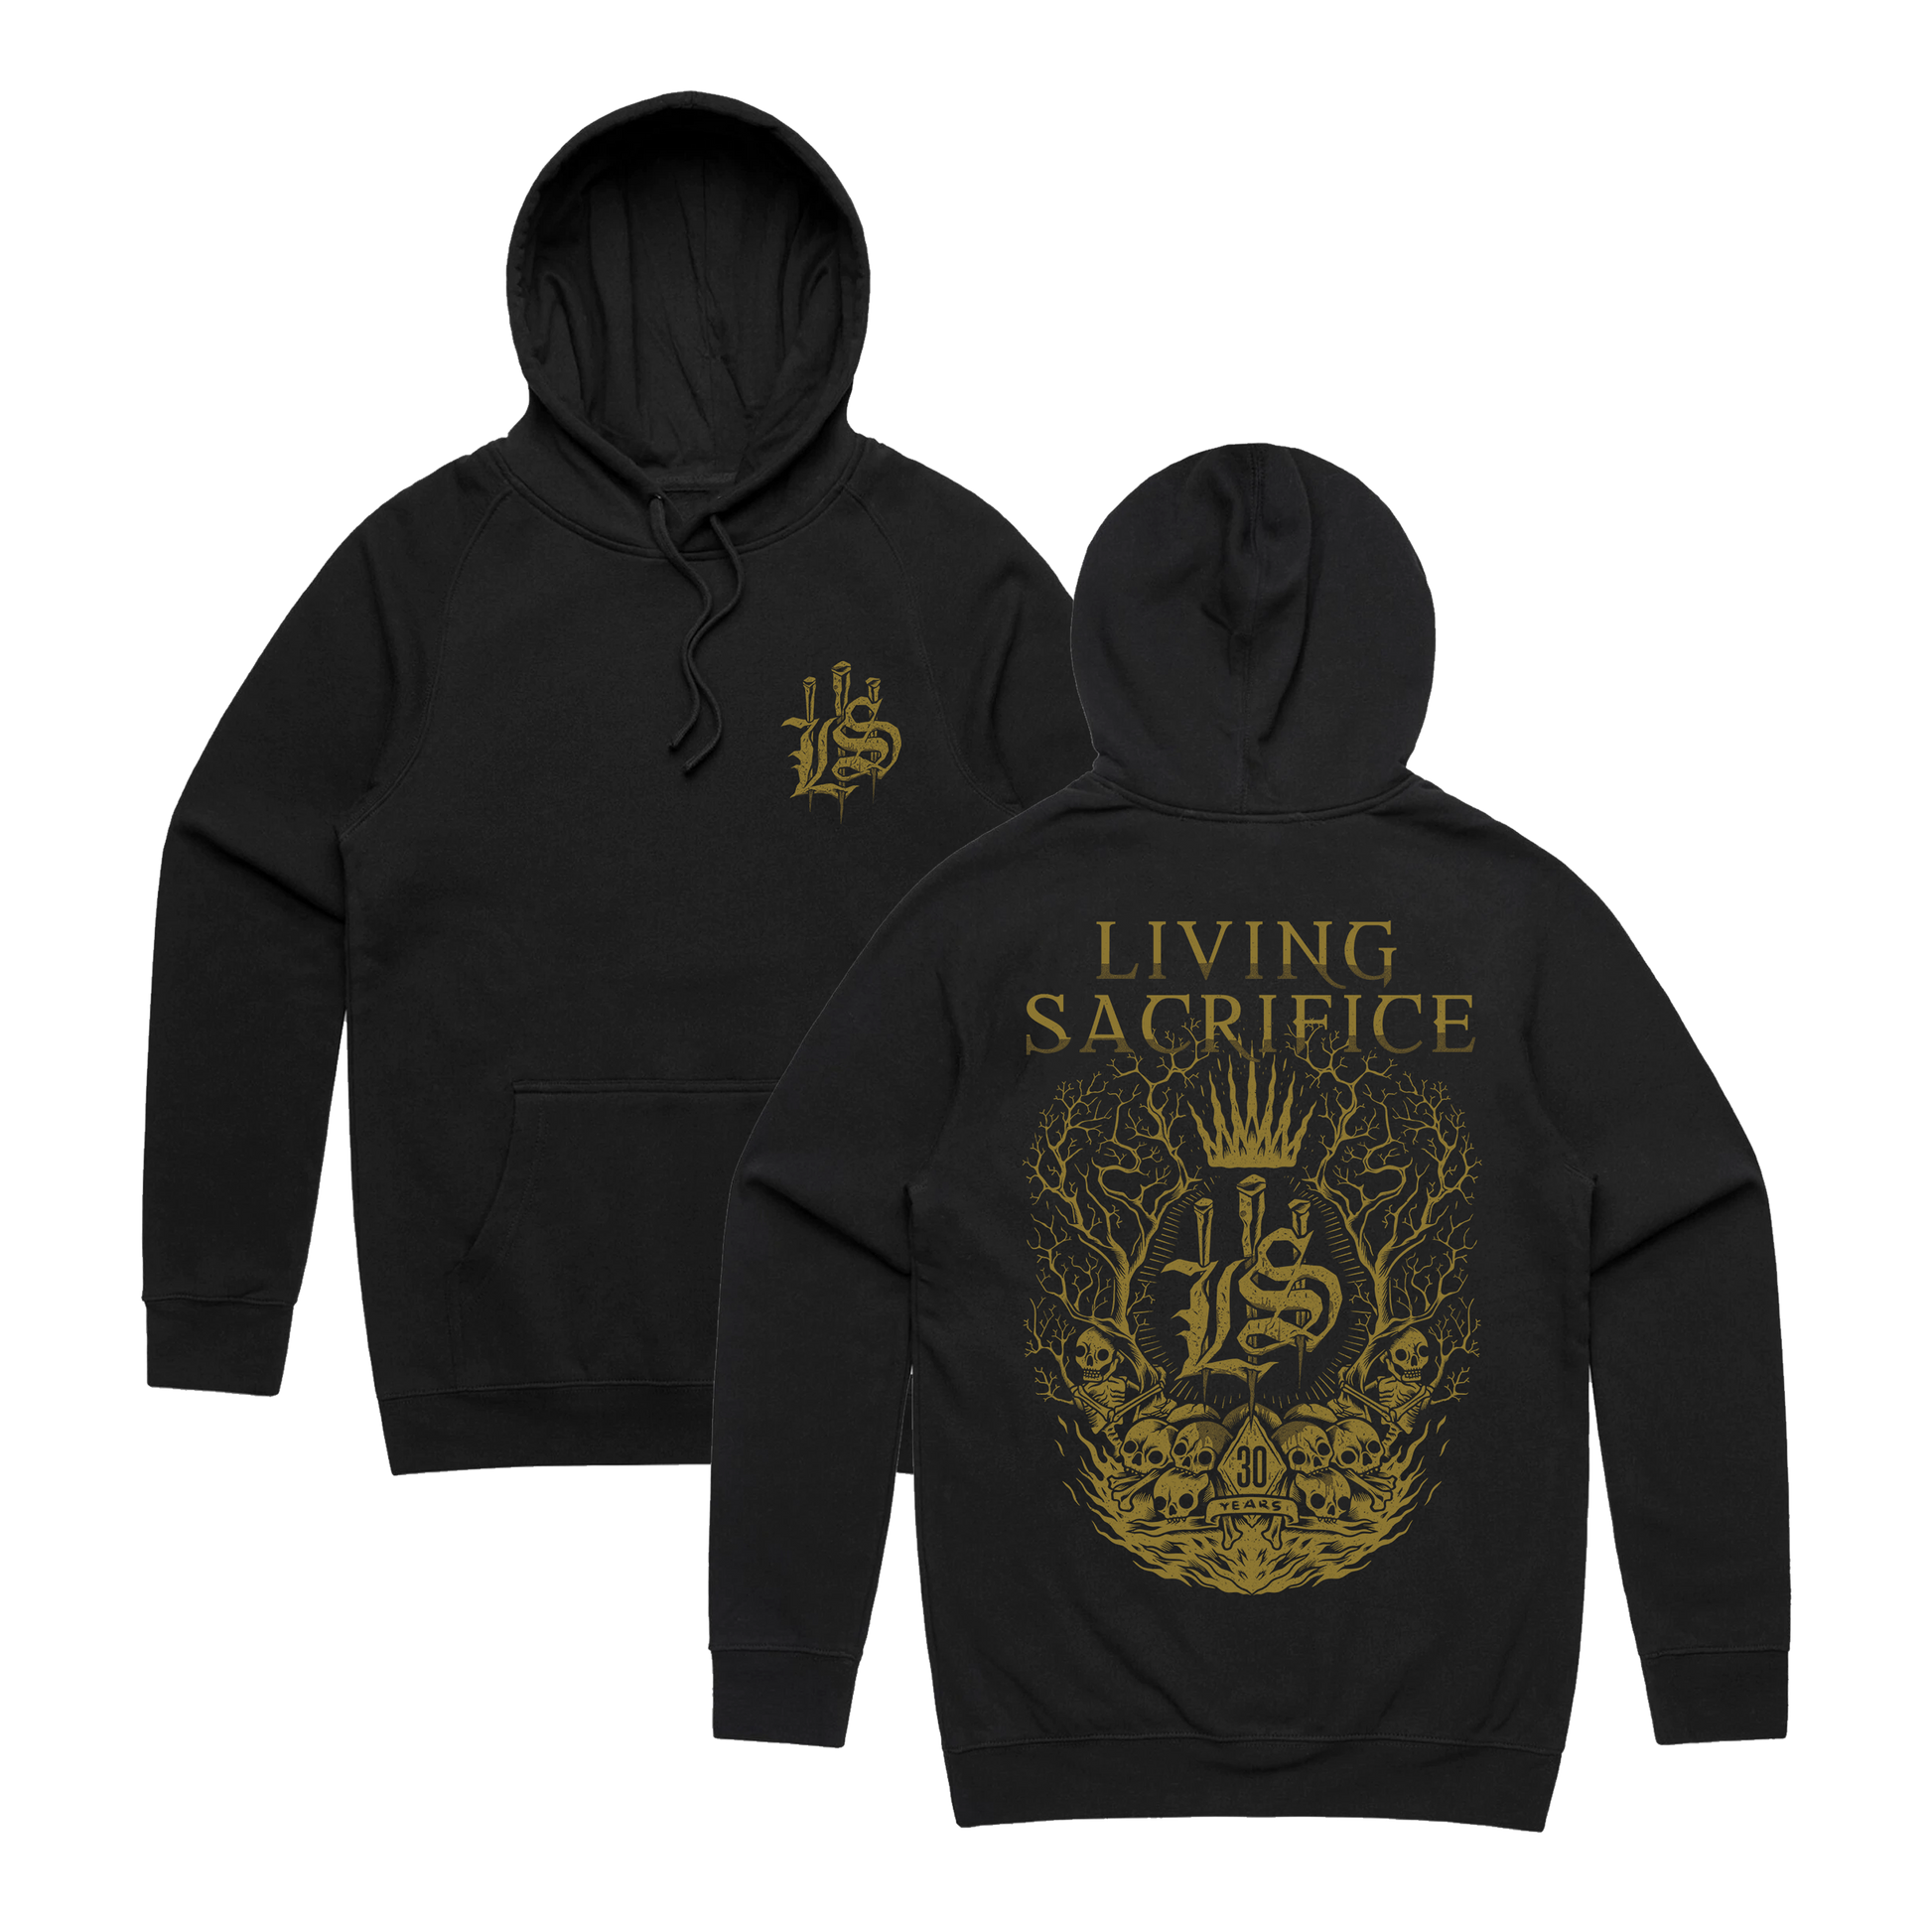 Living Sacrifice - 30 Year Pullover Hoodie.